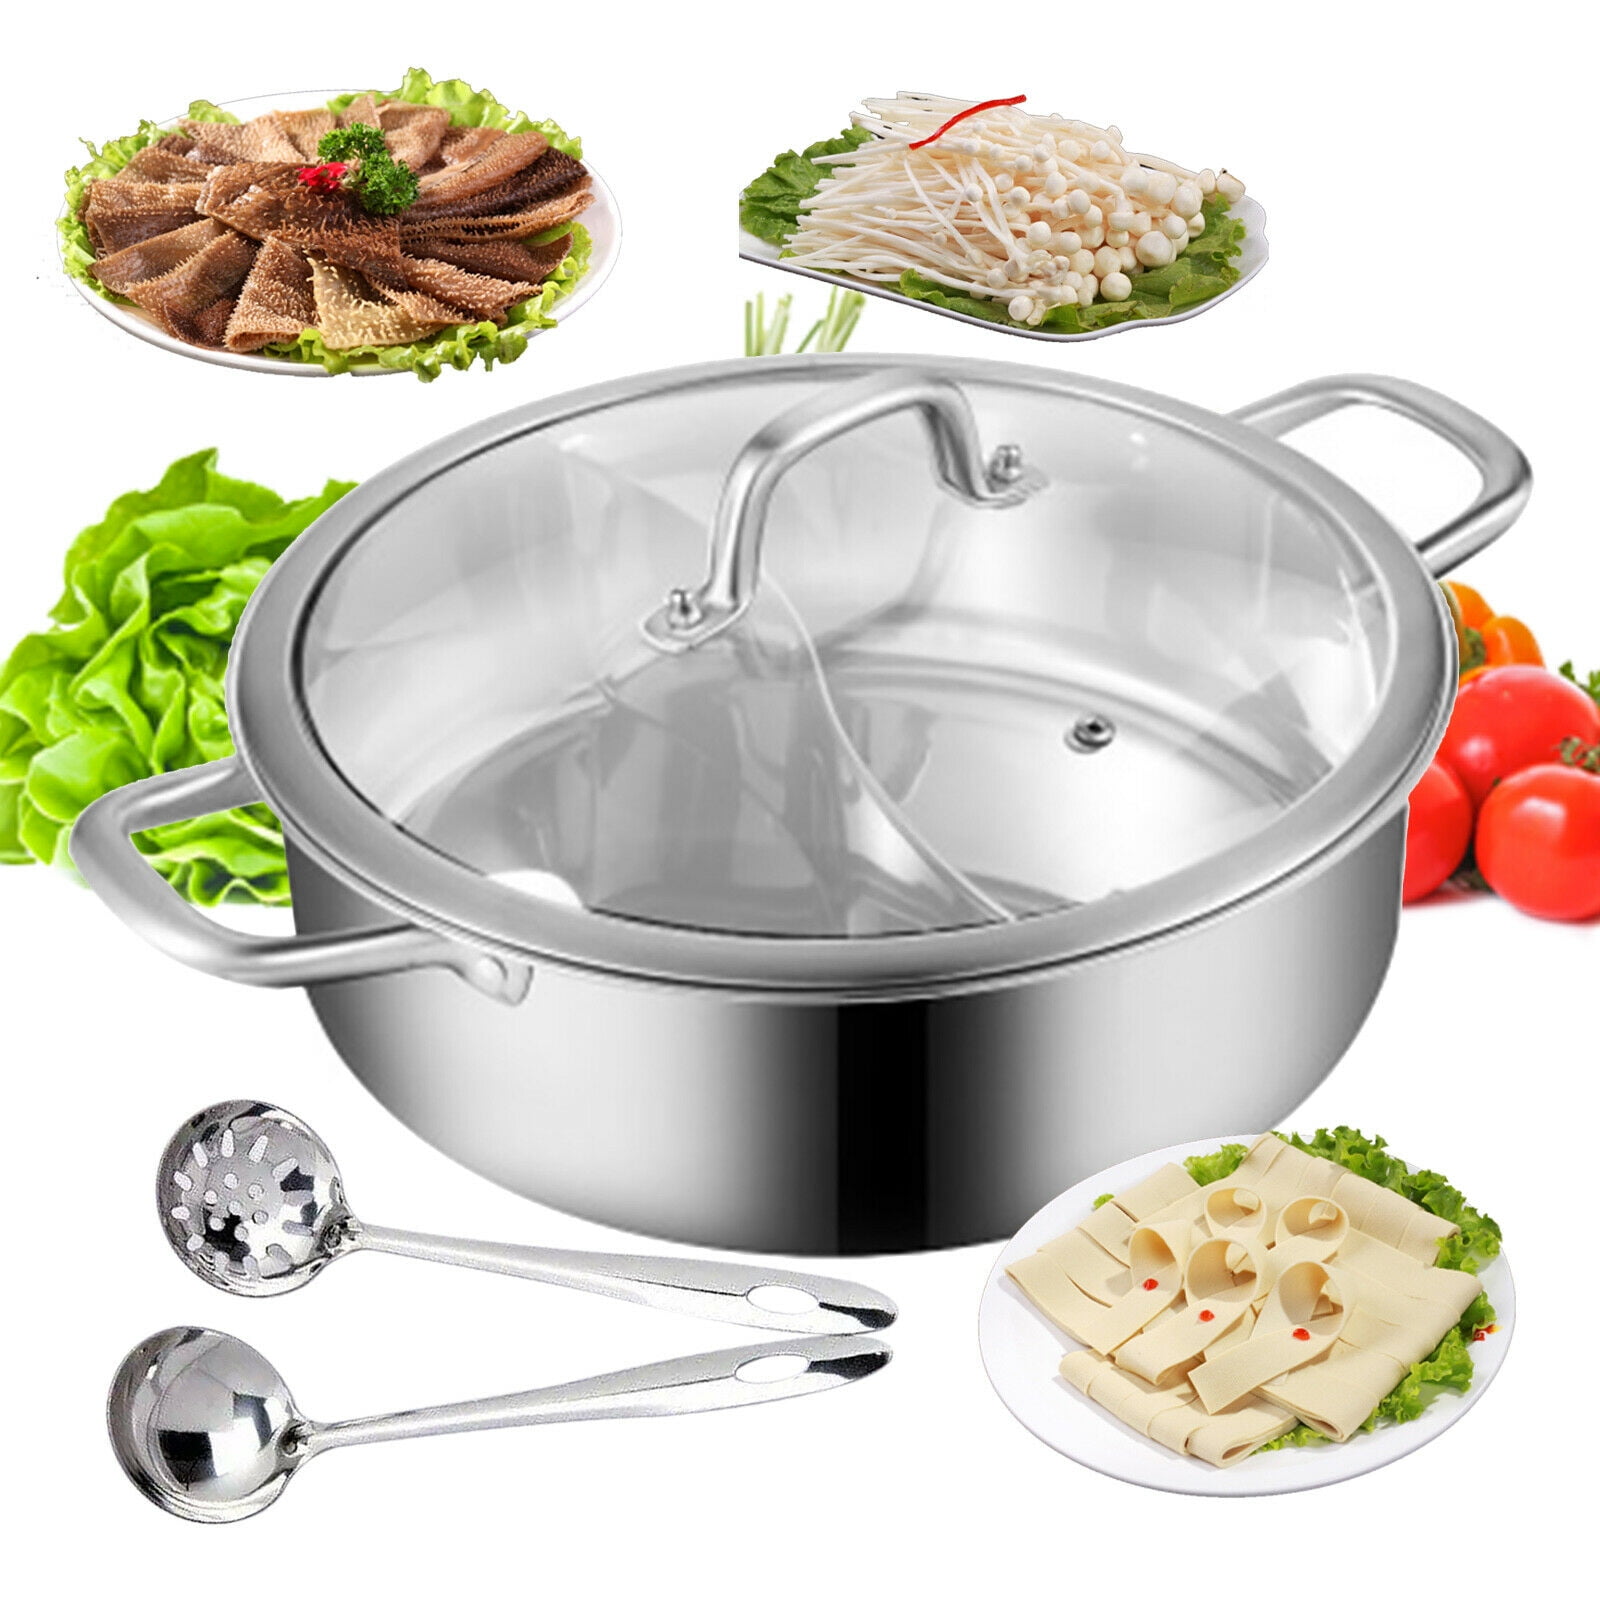 Funny Brown Ceramic Divided Cooking Hot Pots Cookware Small Round Chafing  Shabu Shabu Soup Pot Double Handle